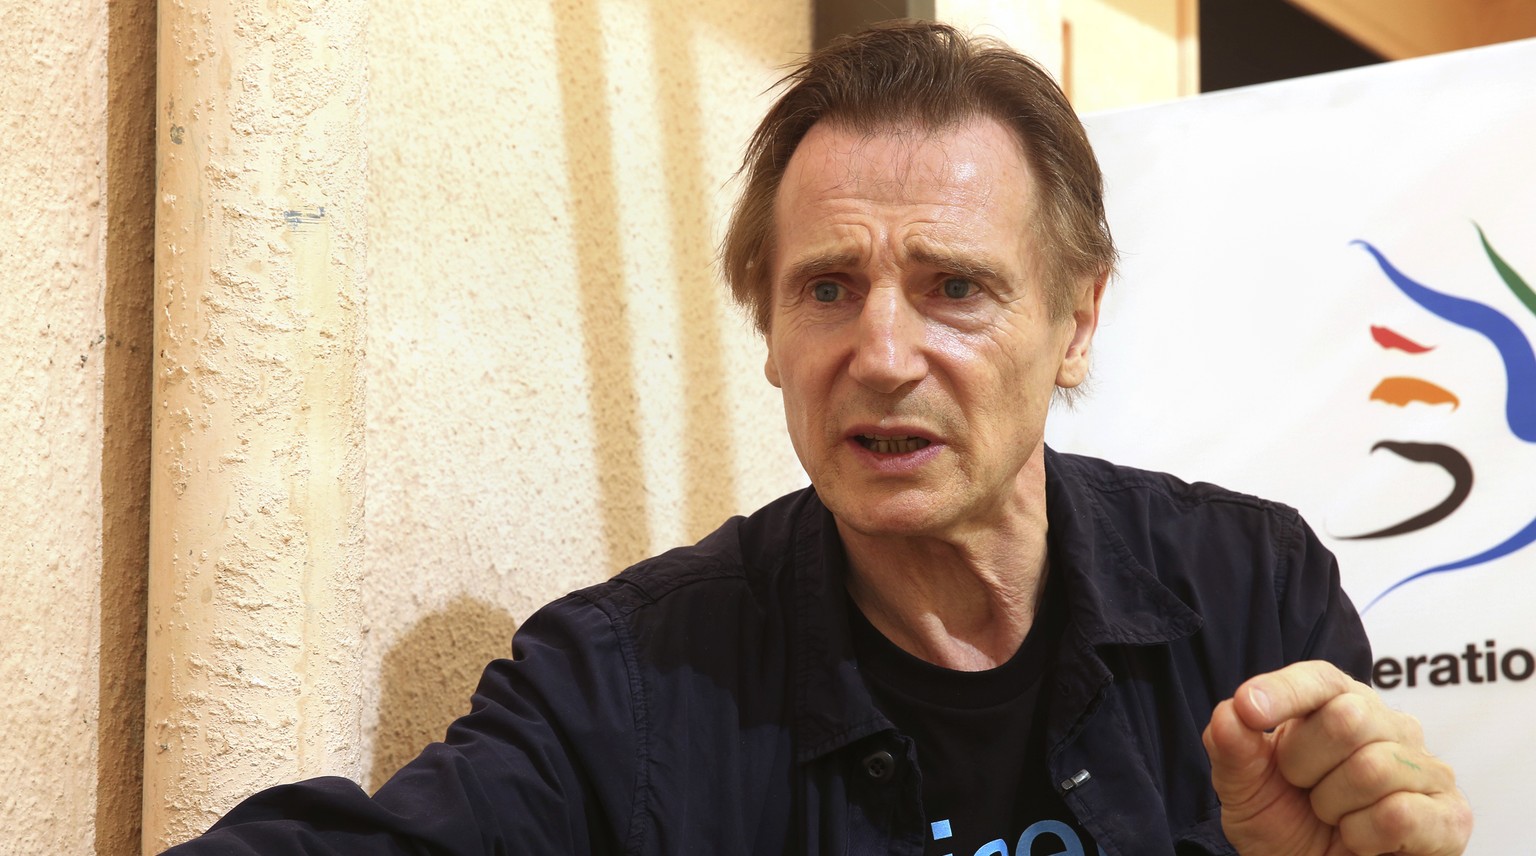 In this Tuesday, Nov. 8, 2016 photo, actor Liam Neeson, speaks during an interview at a community center in a working-class neighborhood of Amman, Jordan. Neeson met with young Syrian refugees in Jord ...